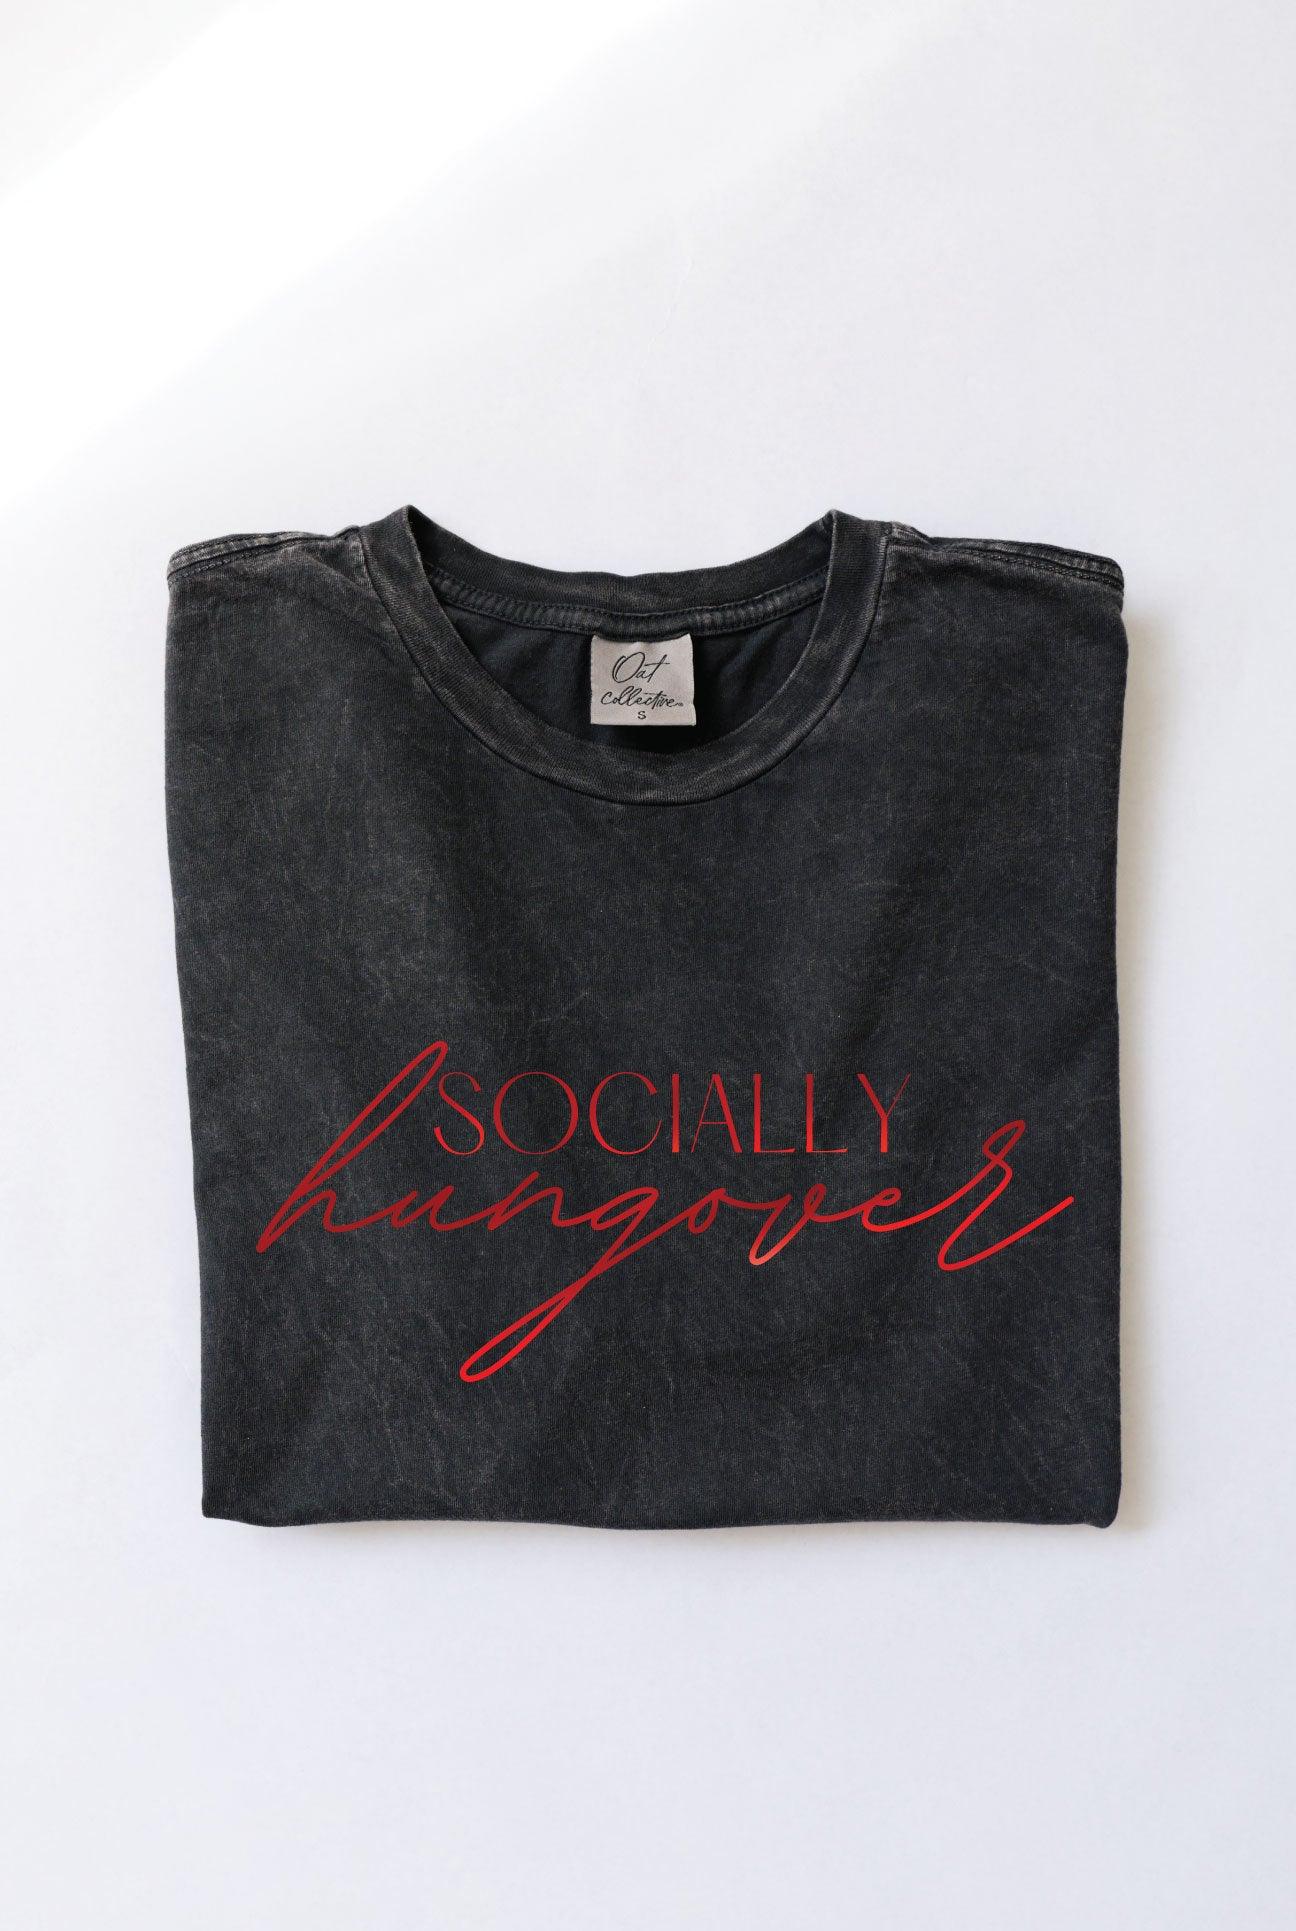 SOCIALLY HUNGOVER OVERSIZED TEE (RESTOCKED) , graphic t-shirt , It's NOMB , christmas graphic t-shirt, MINERAL WASHED GRAPHIC TEE, oversized christmas graphic tee, SOCIAL HANGOVER, socially hungover, SOCIALLY HUNGOVER T-SHIRT, SOCIALLY HUNGOVER TEE , It's NOMB , itsnomb.com